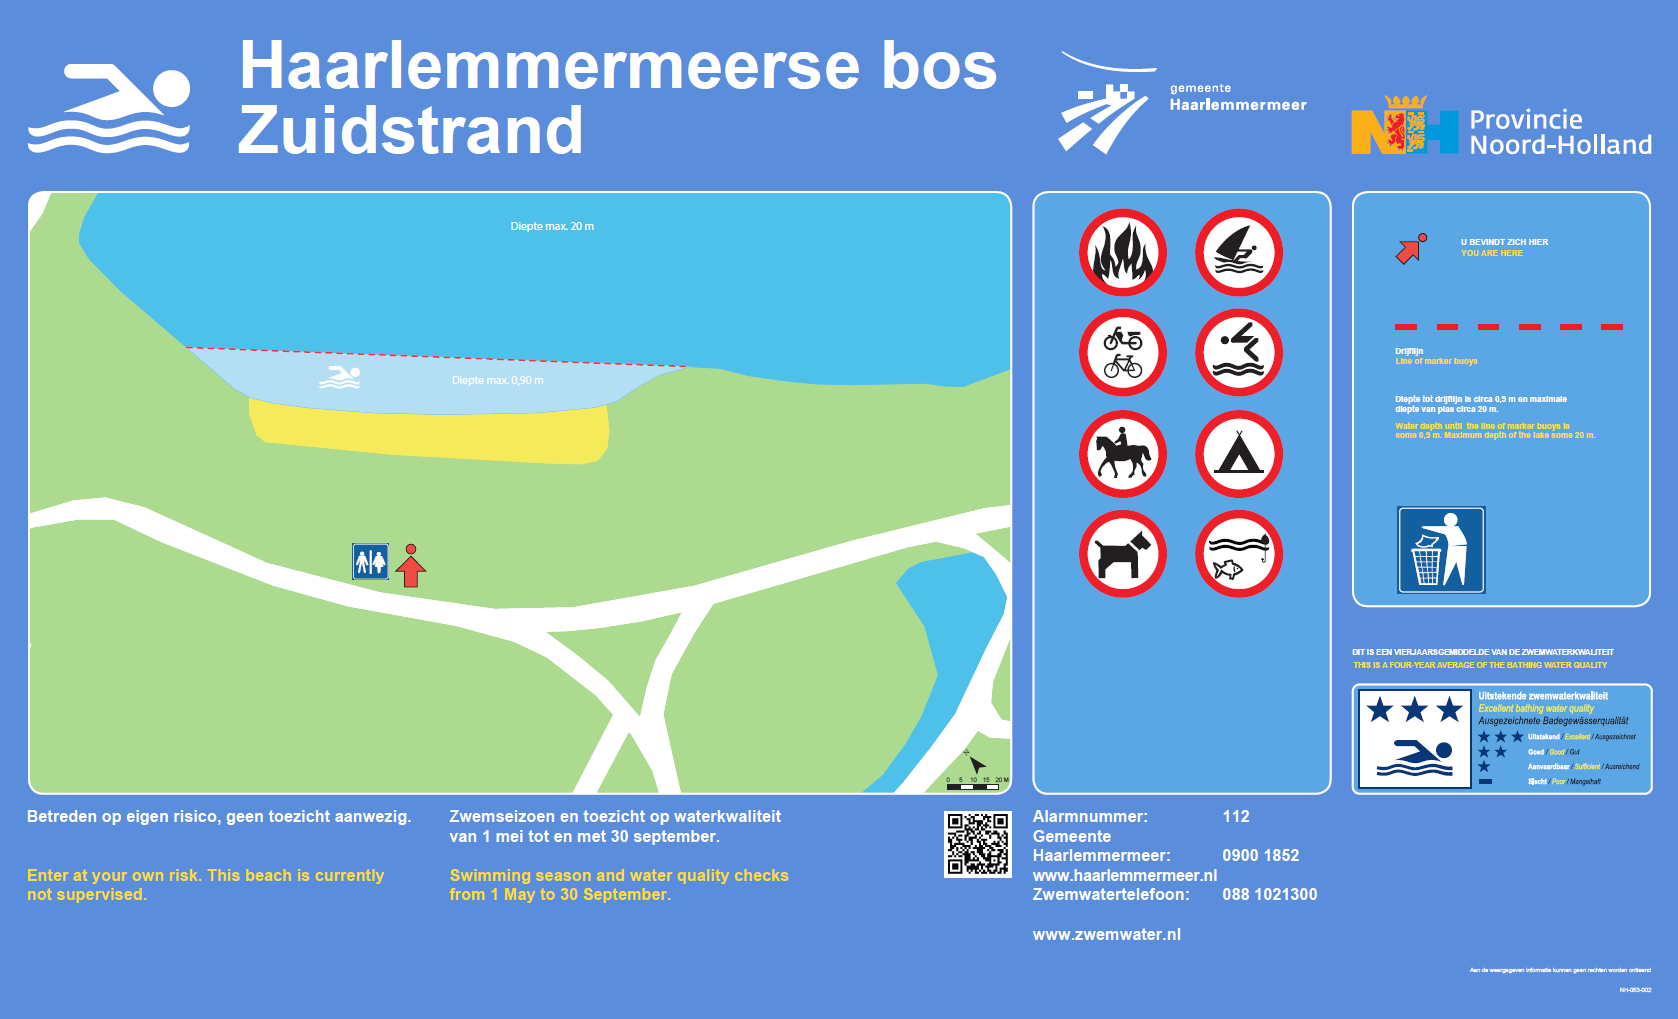 The information board at the swimming location Haarlemmermeerse Bos Zuidstrand